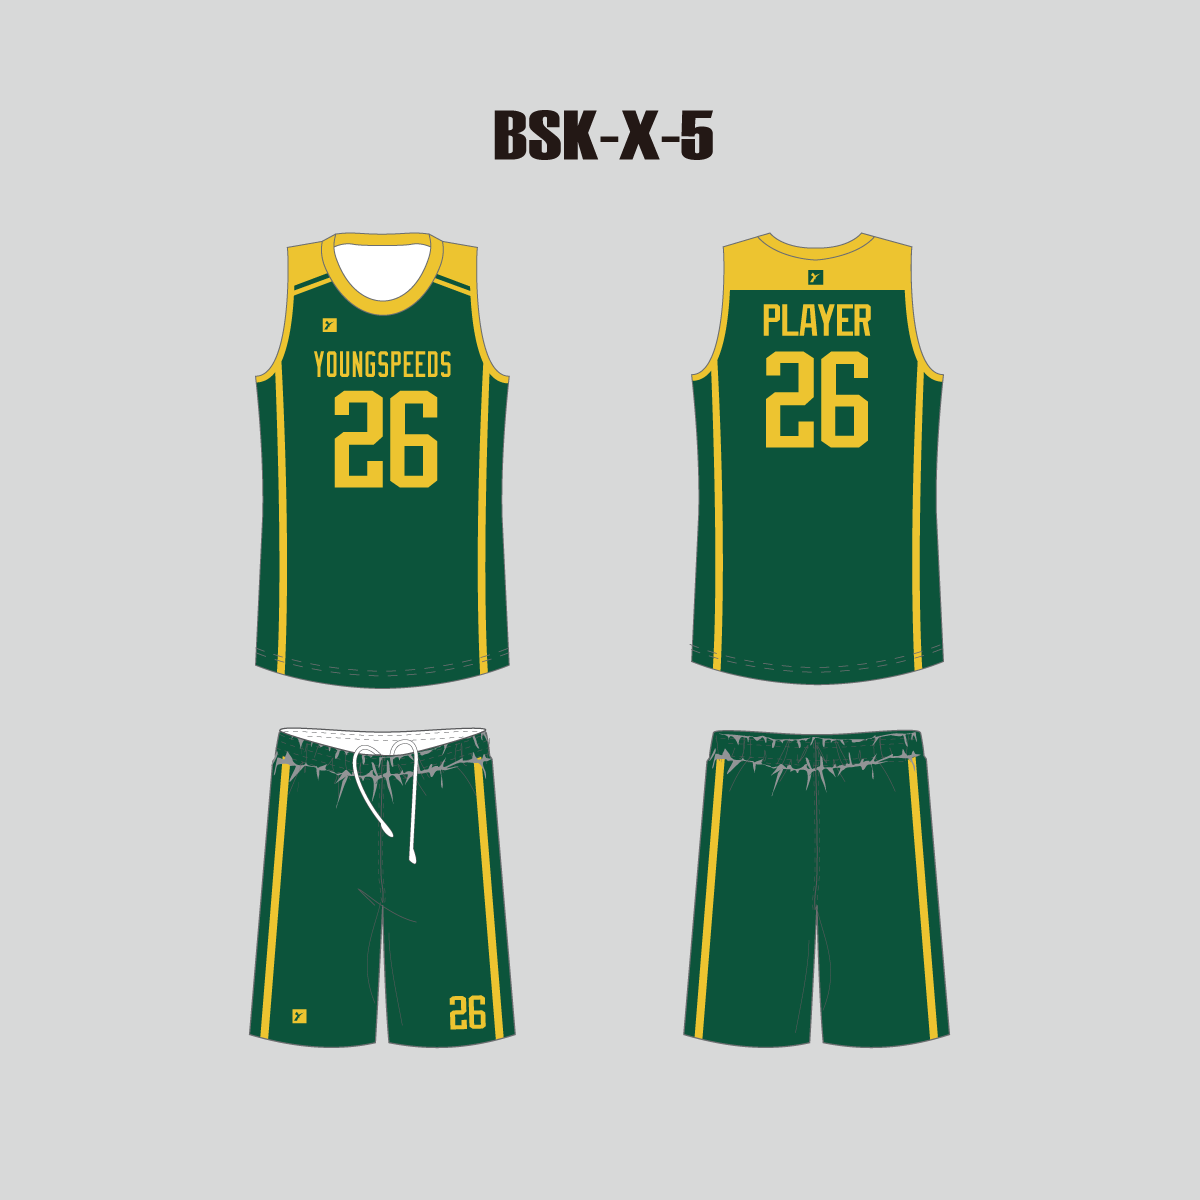 green and yellow basketball jersey